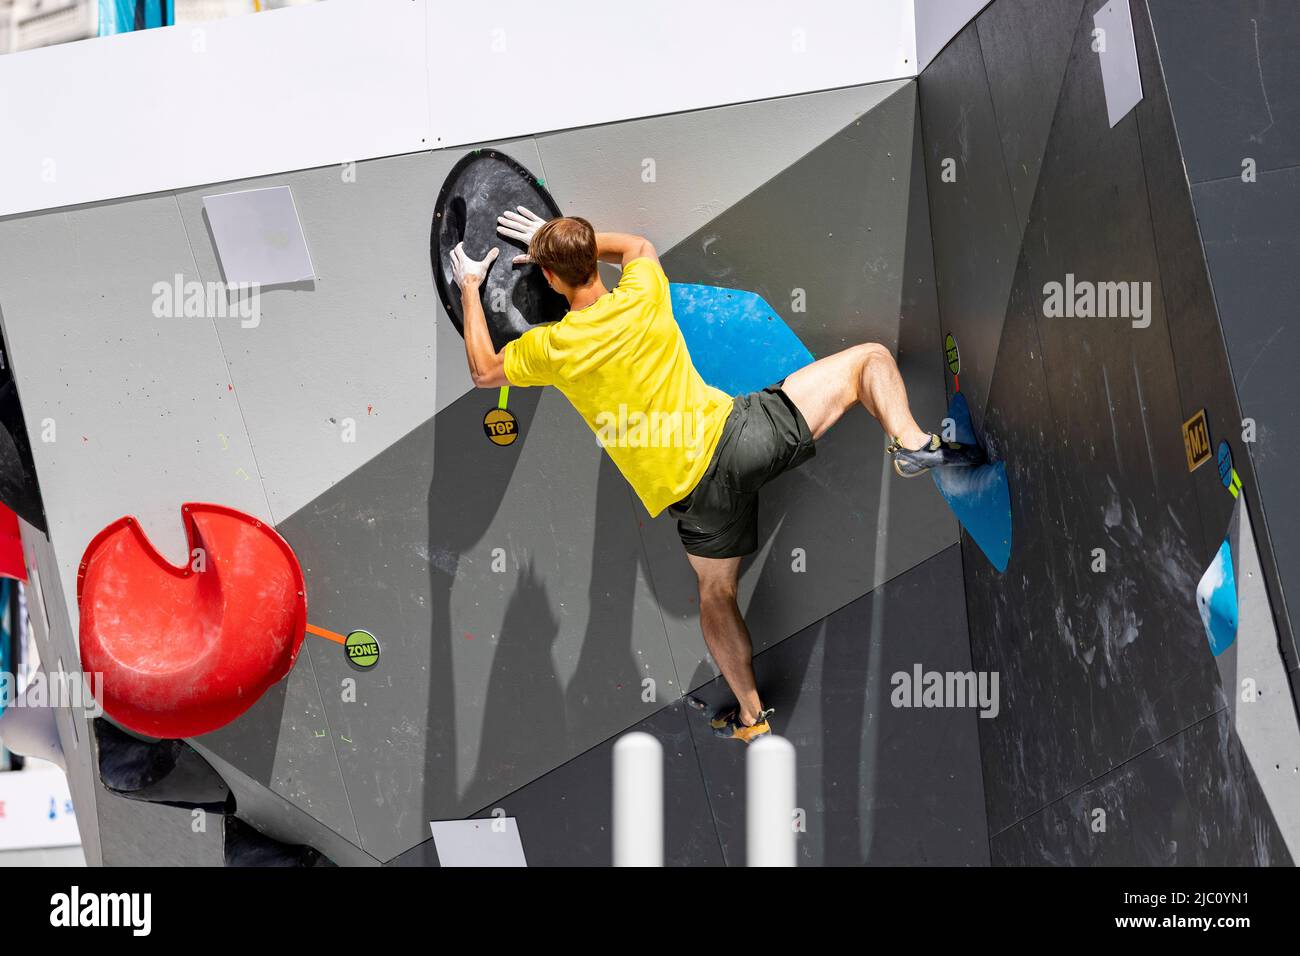 Climbing. Sport. Young person climbing in Block Climbing. Olympic exercise. Olympic Sport. Photography. Speed competition and combined. Olympic Games Stock Photo